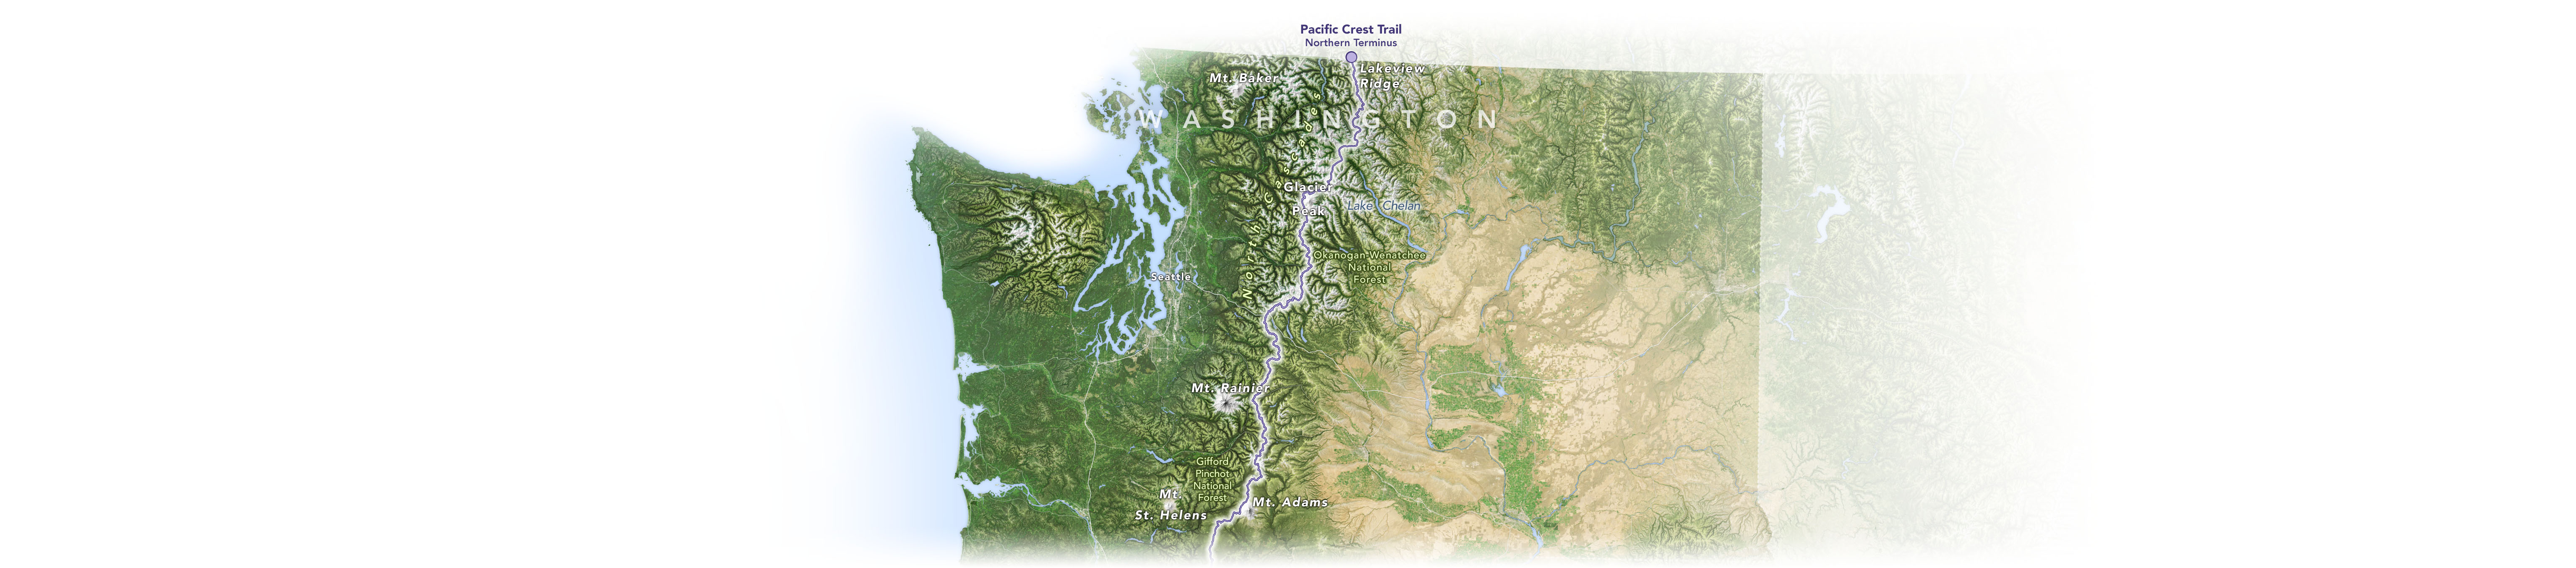 A map of the Pacific Crest Trail and nearby landmarks in the state of Washington.